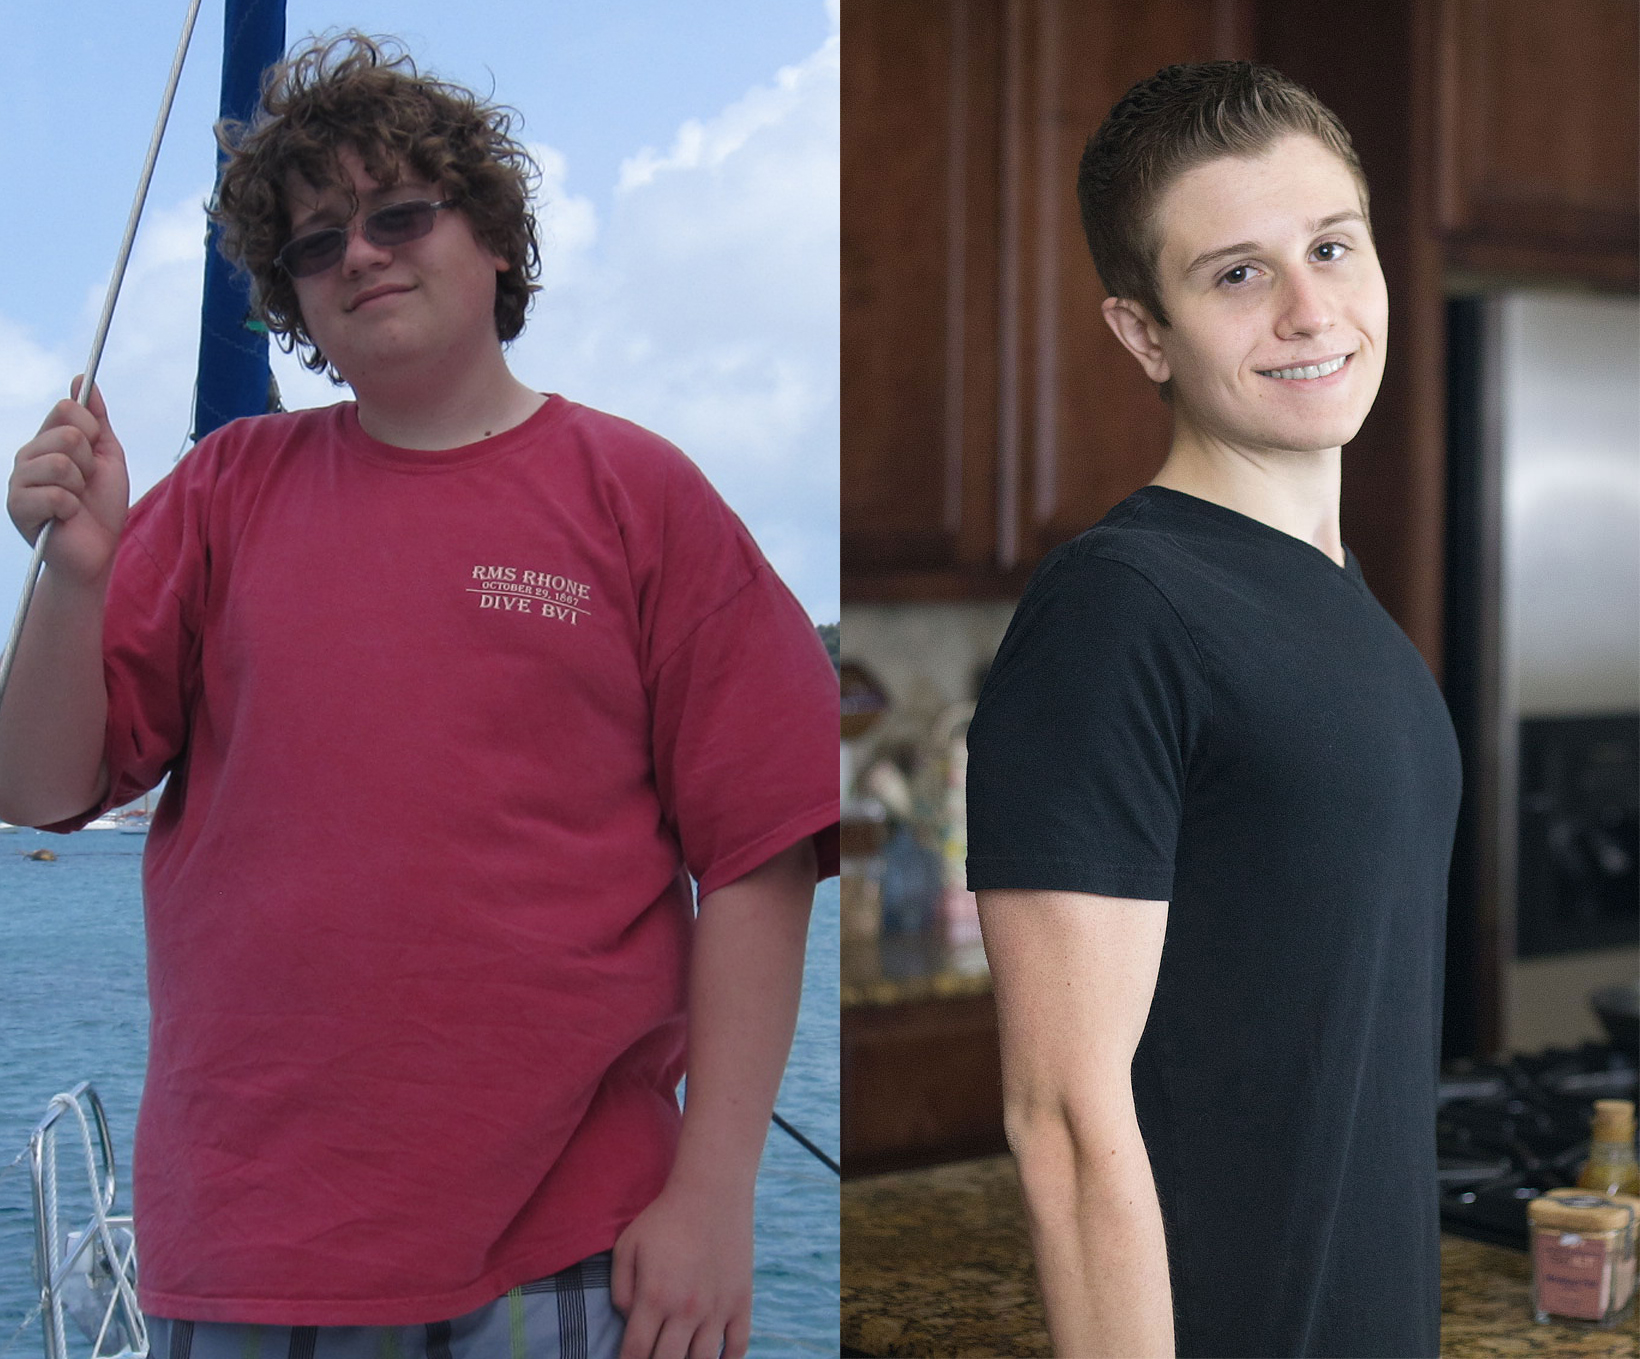 Before/after: 228/127 lbs. he enjoys his new body.